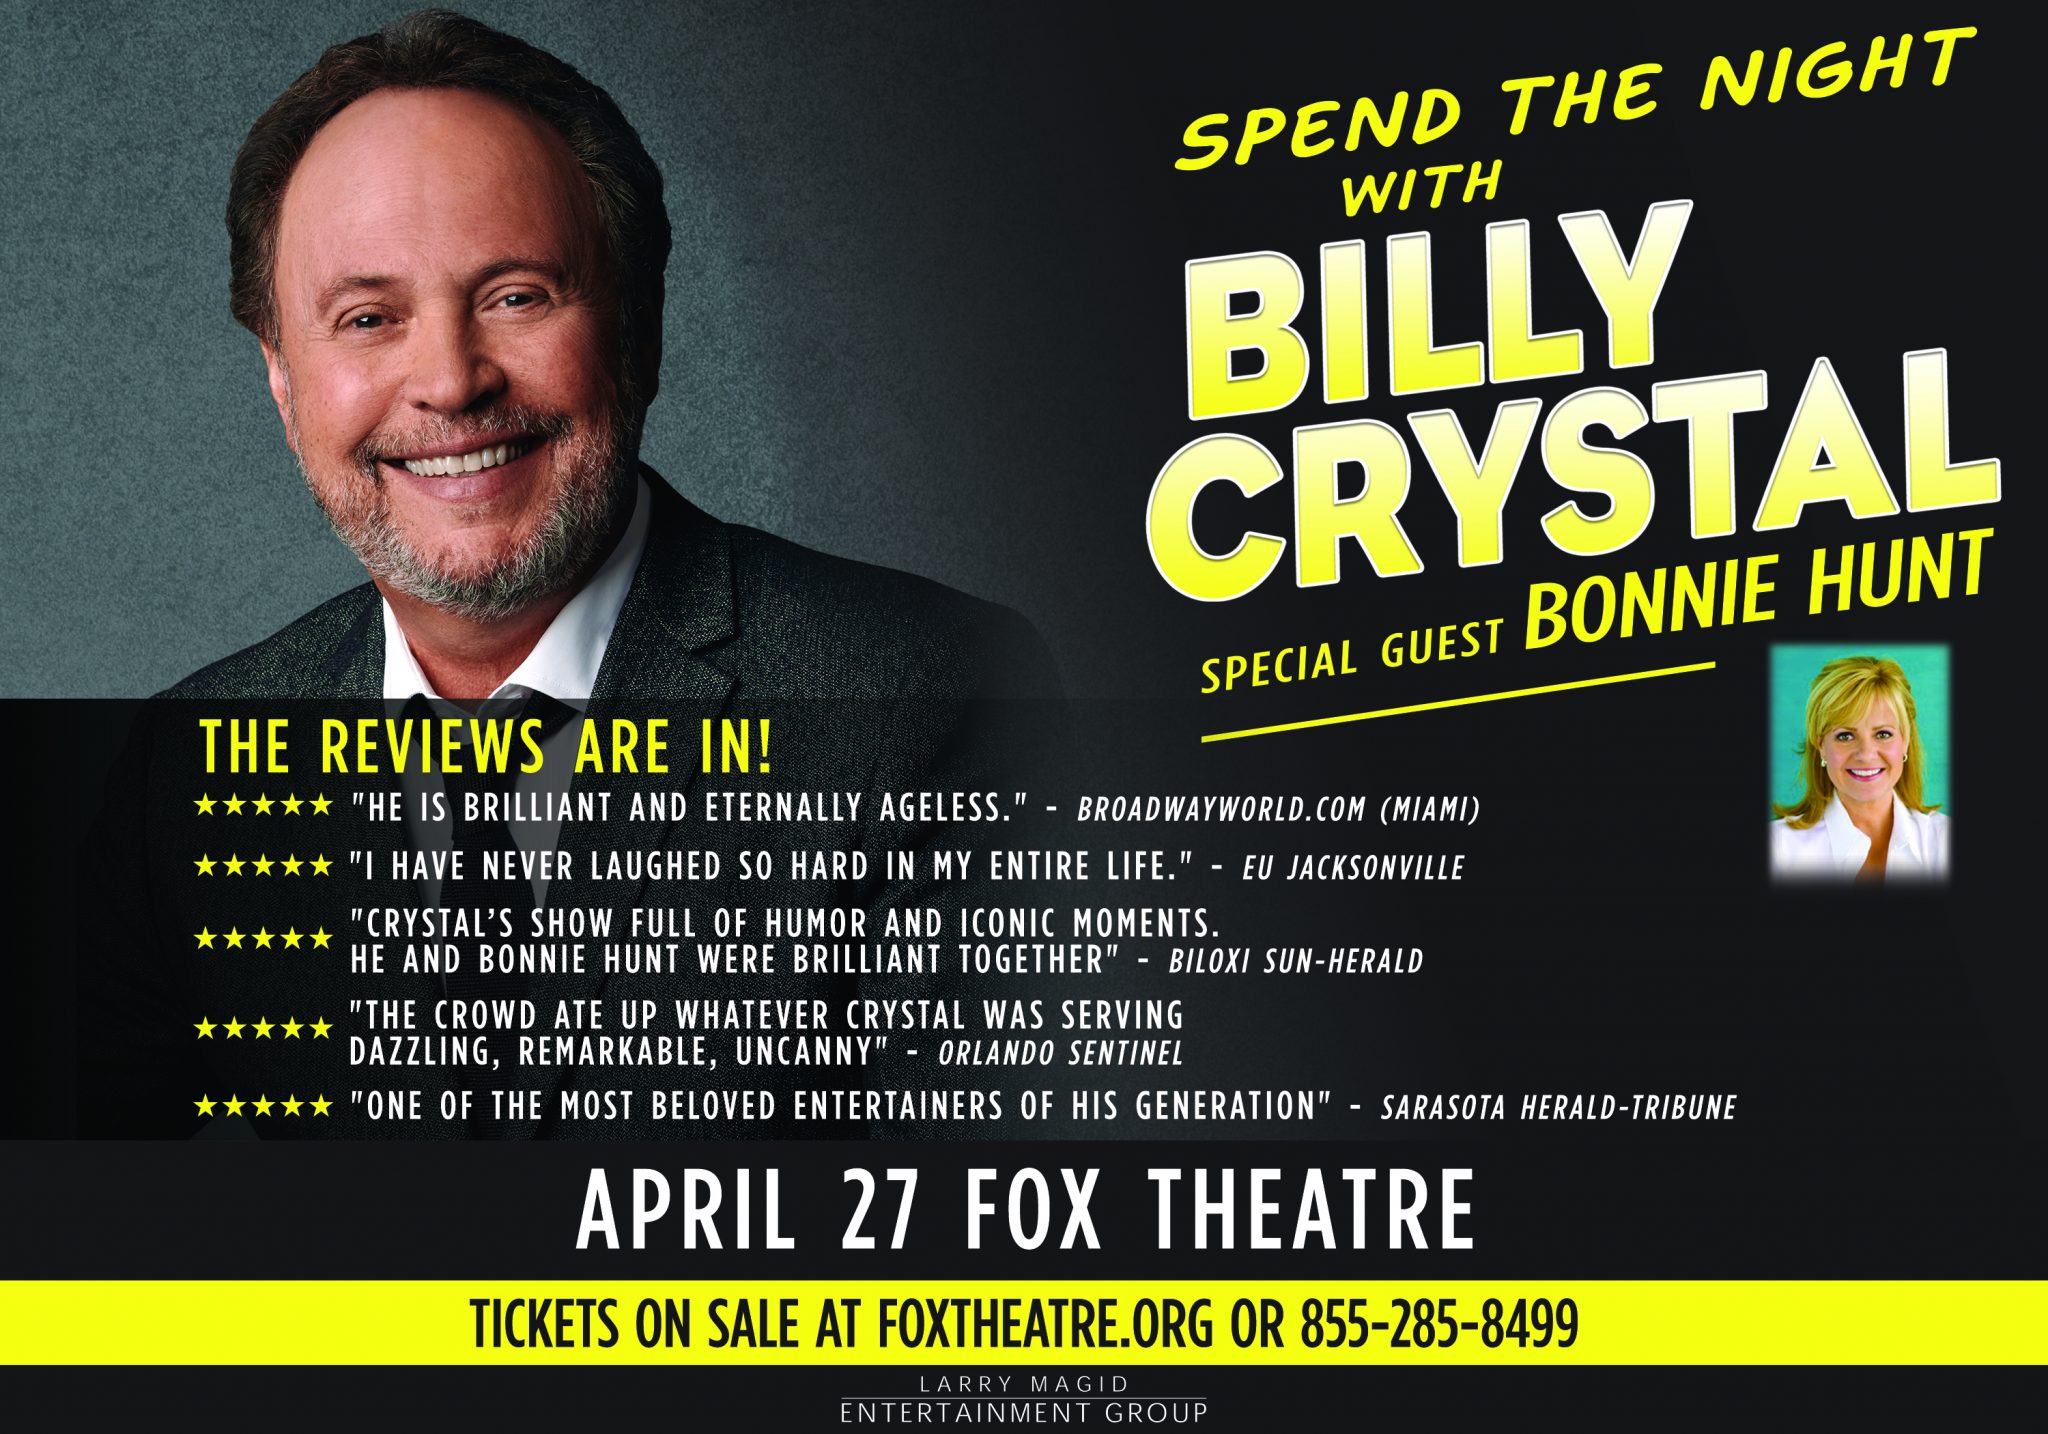 Facebook Friday Freebie! Win 2 Tickets to see Billy Crystal at The Fox Theatre!